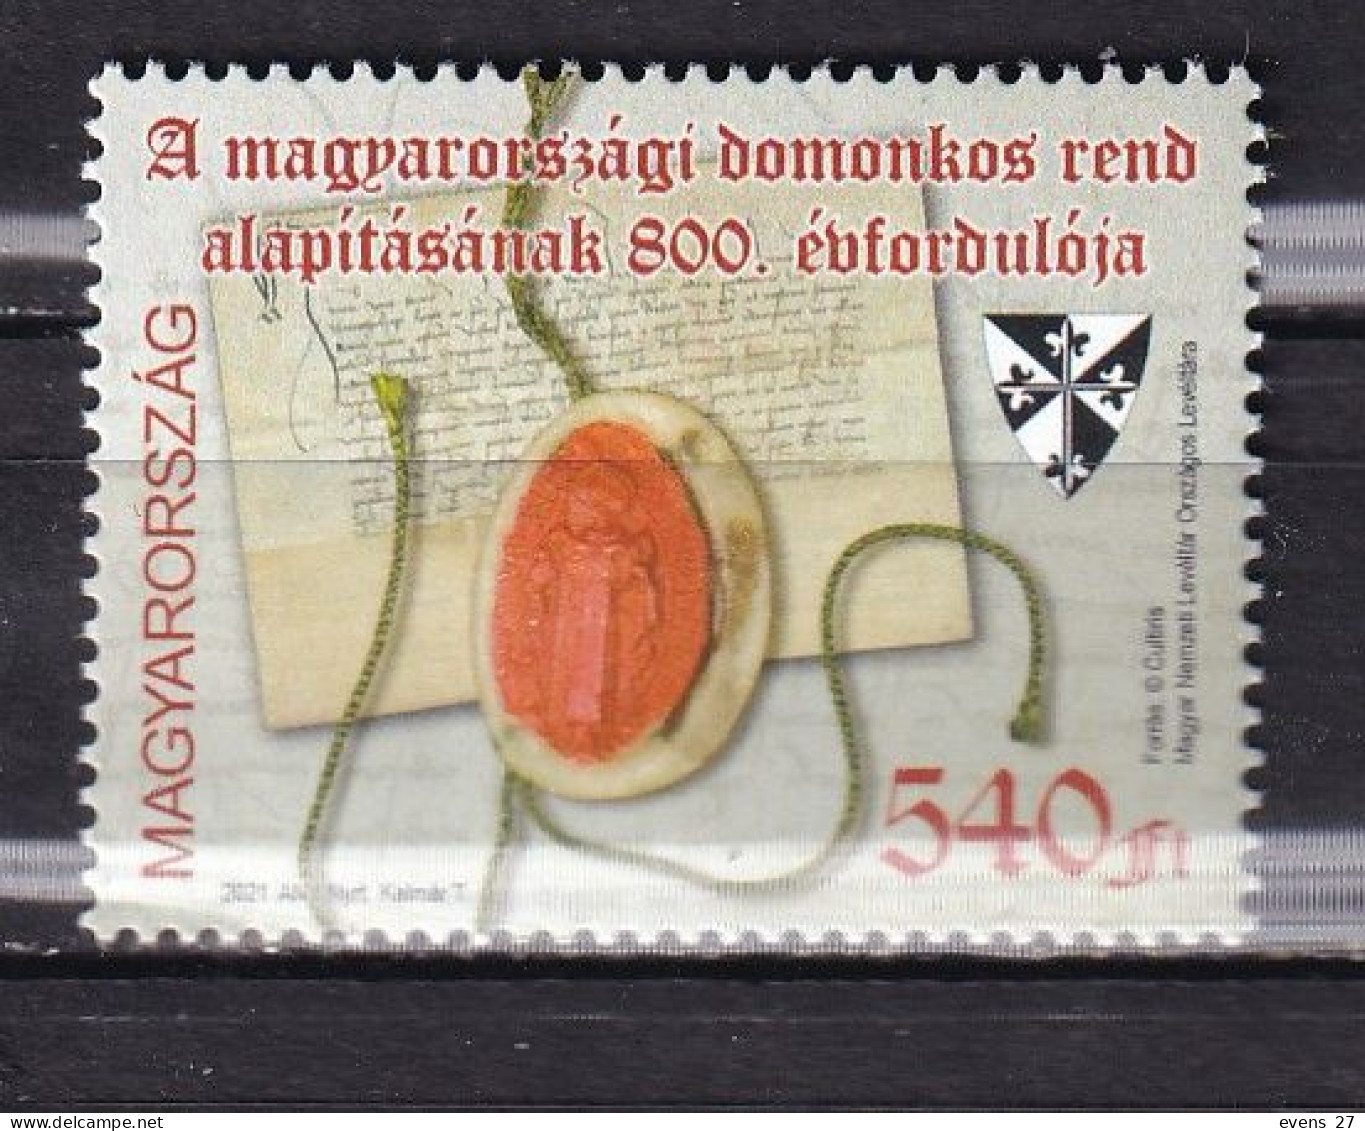 HUNGARY-2021- DOMINICAN ORDER-MNH. - Neufs